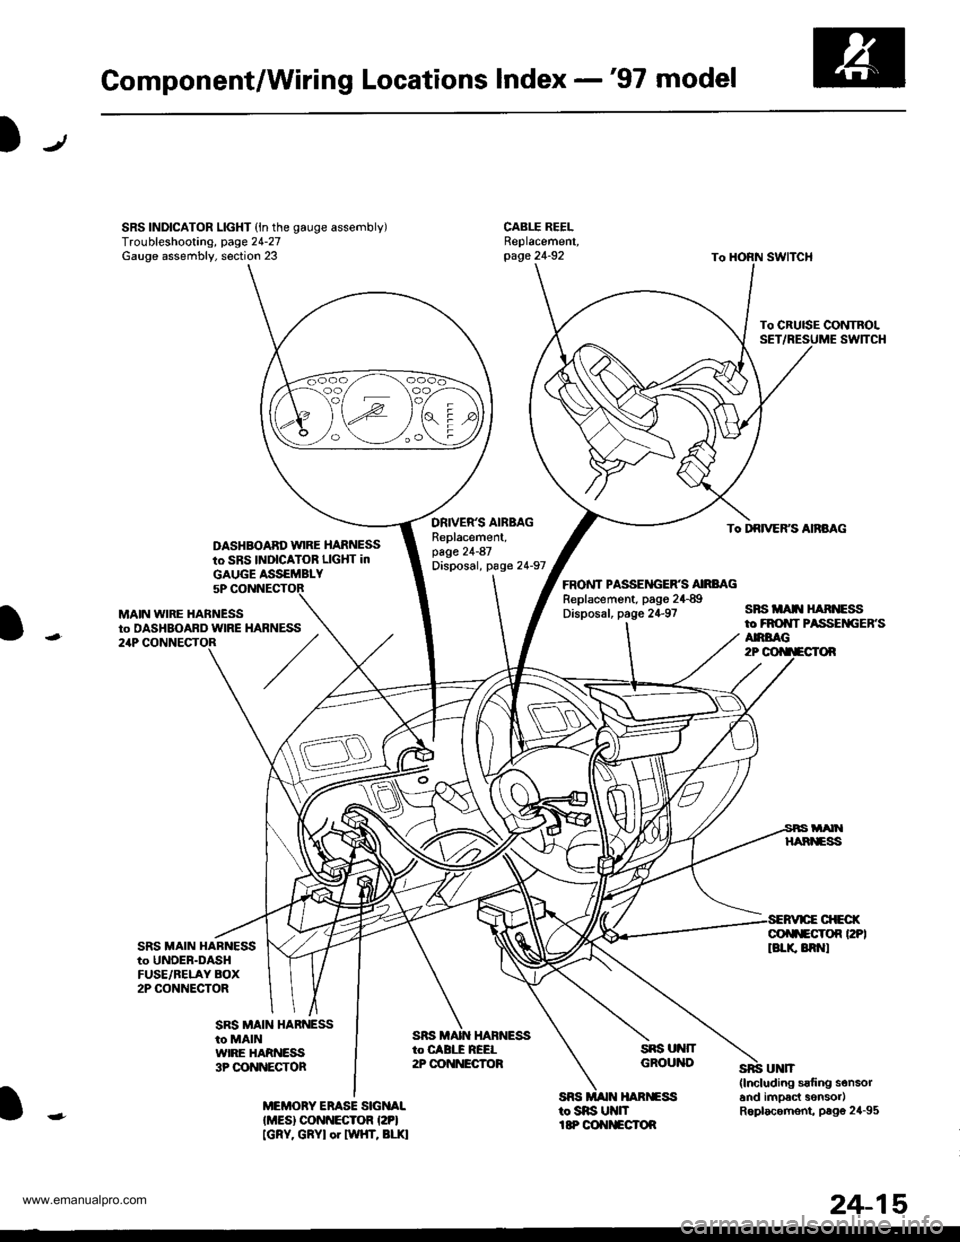 HONDA CR-V 2000 RD1-RD3 / 1.G Workshop Manual 
Component/Wiring Locations Index -97 model
SRS INDICATOR LIGHT (ln the gauge assembly)Troubleshooting, page 24-27Gauge assembly, section 23
DASHBOABD w|RE HARNESS
to SBS INDICATOR LIGHT in
DRIVERS 